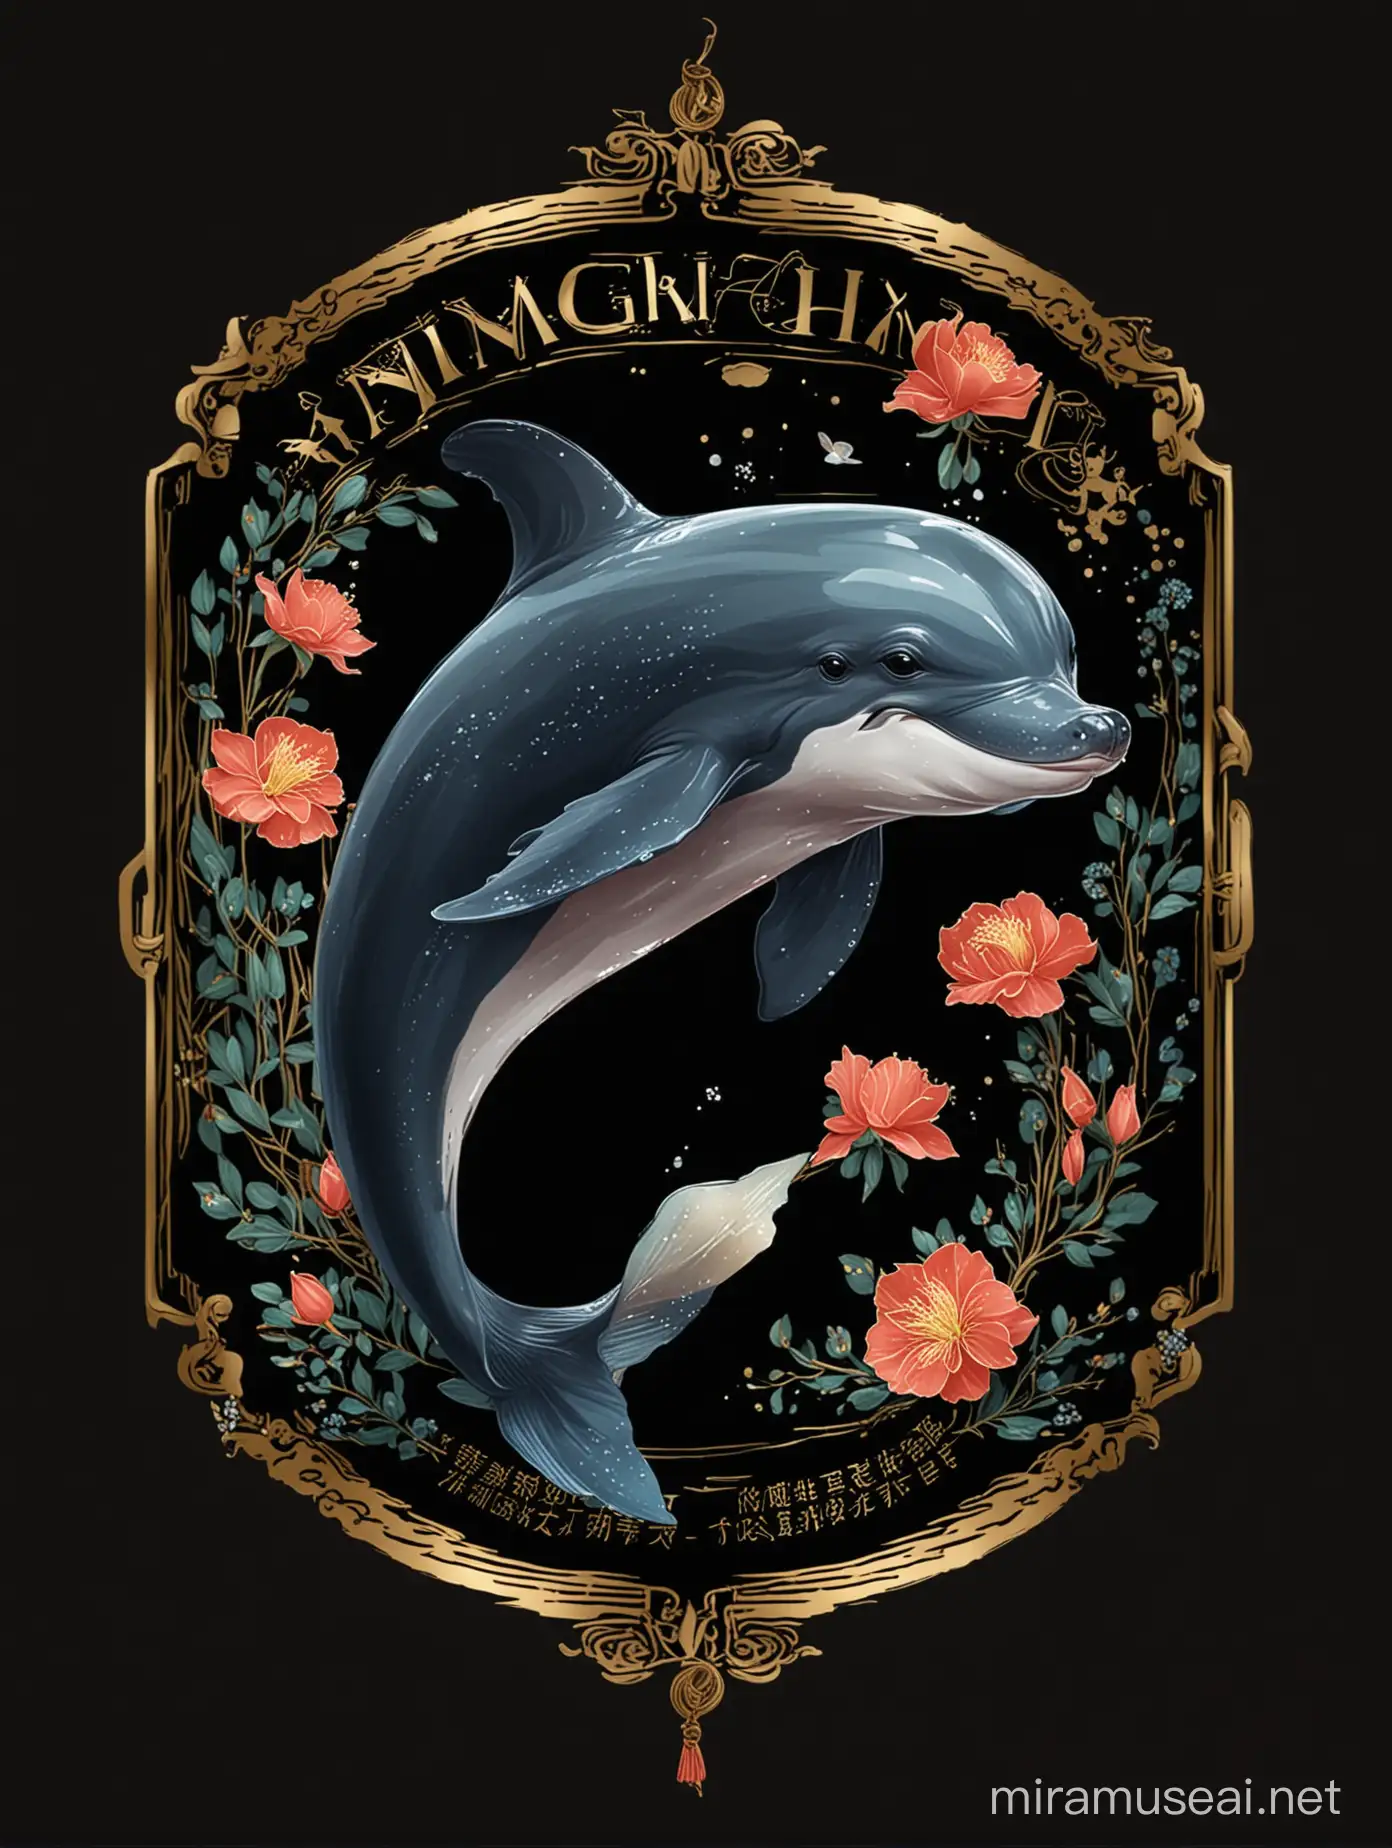 Majestic Yangtze Finless Porpoise A Symbol of Elegance and Conservation